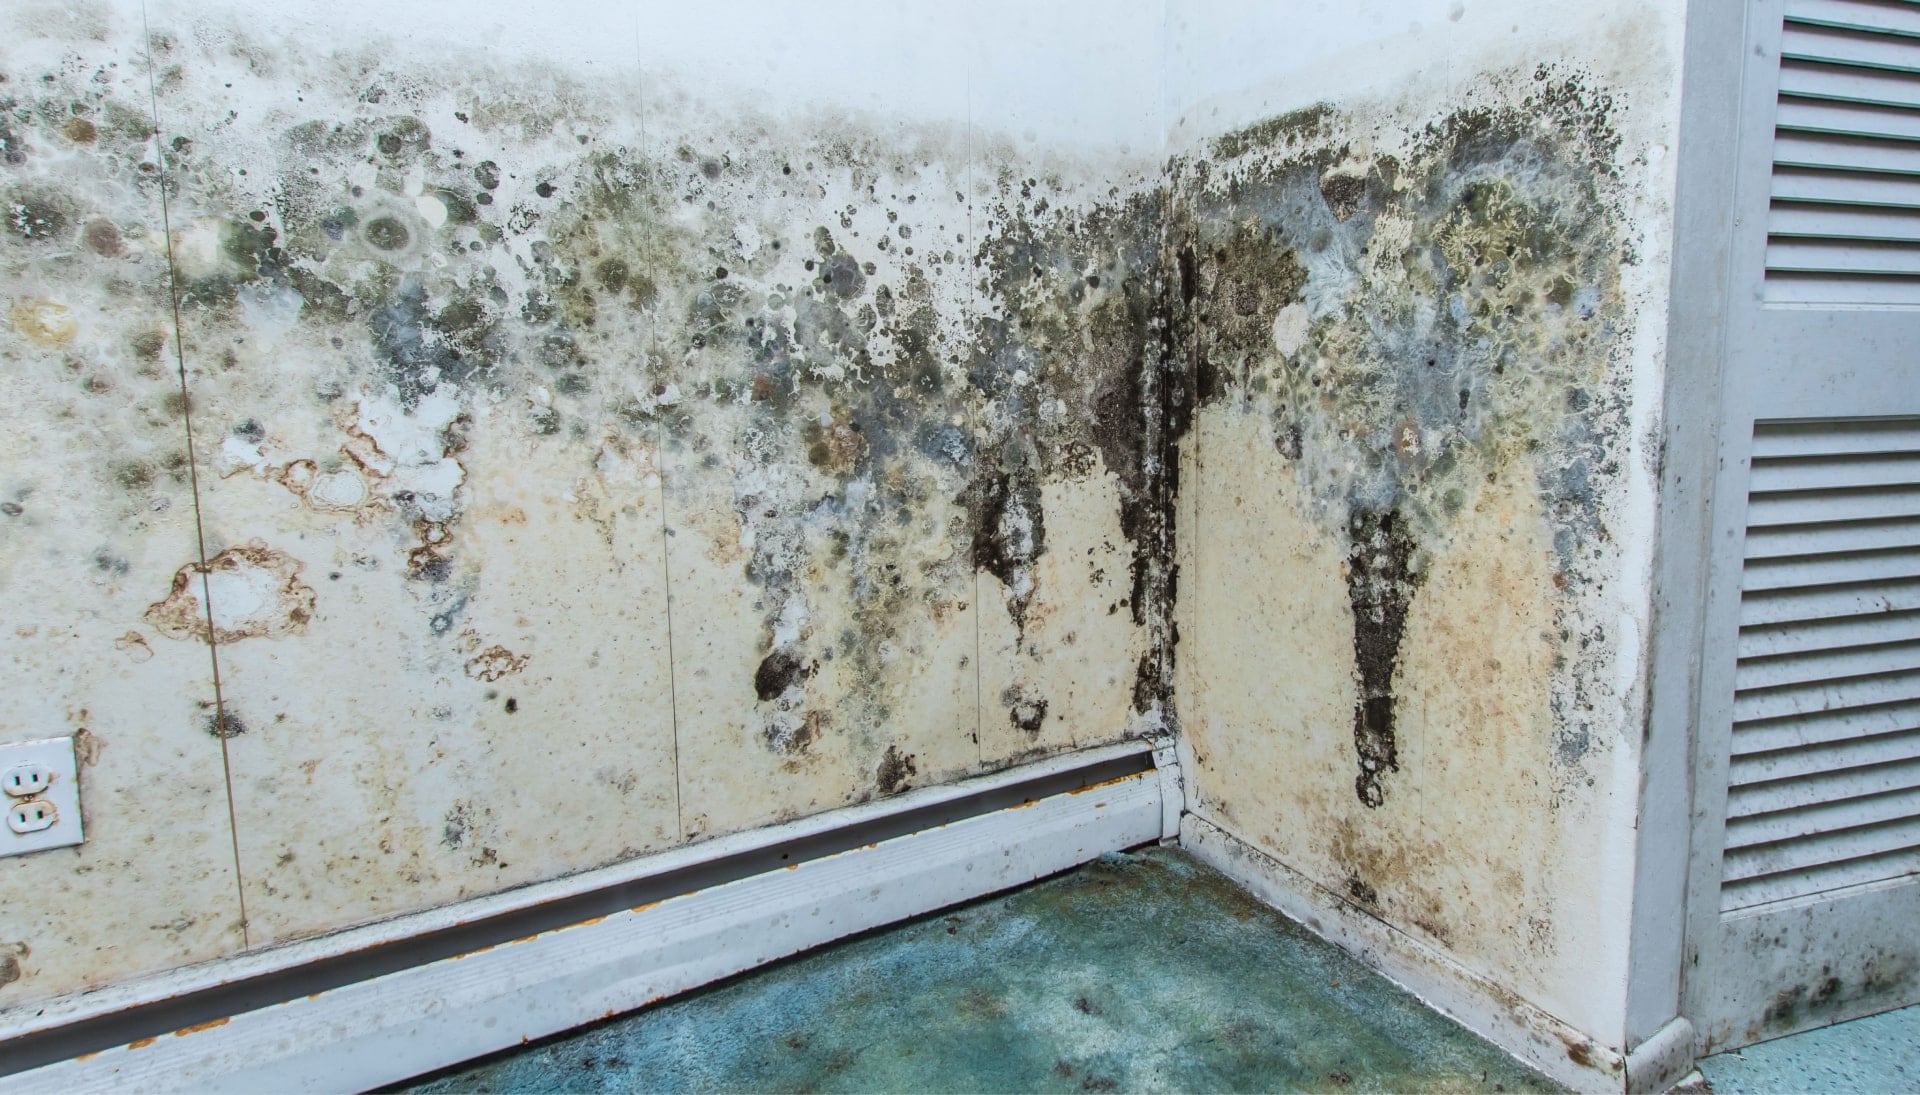 Professional mold removal, odor control, and water damage restoration service in Augusta, Georgia.